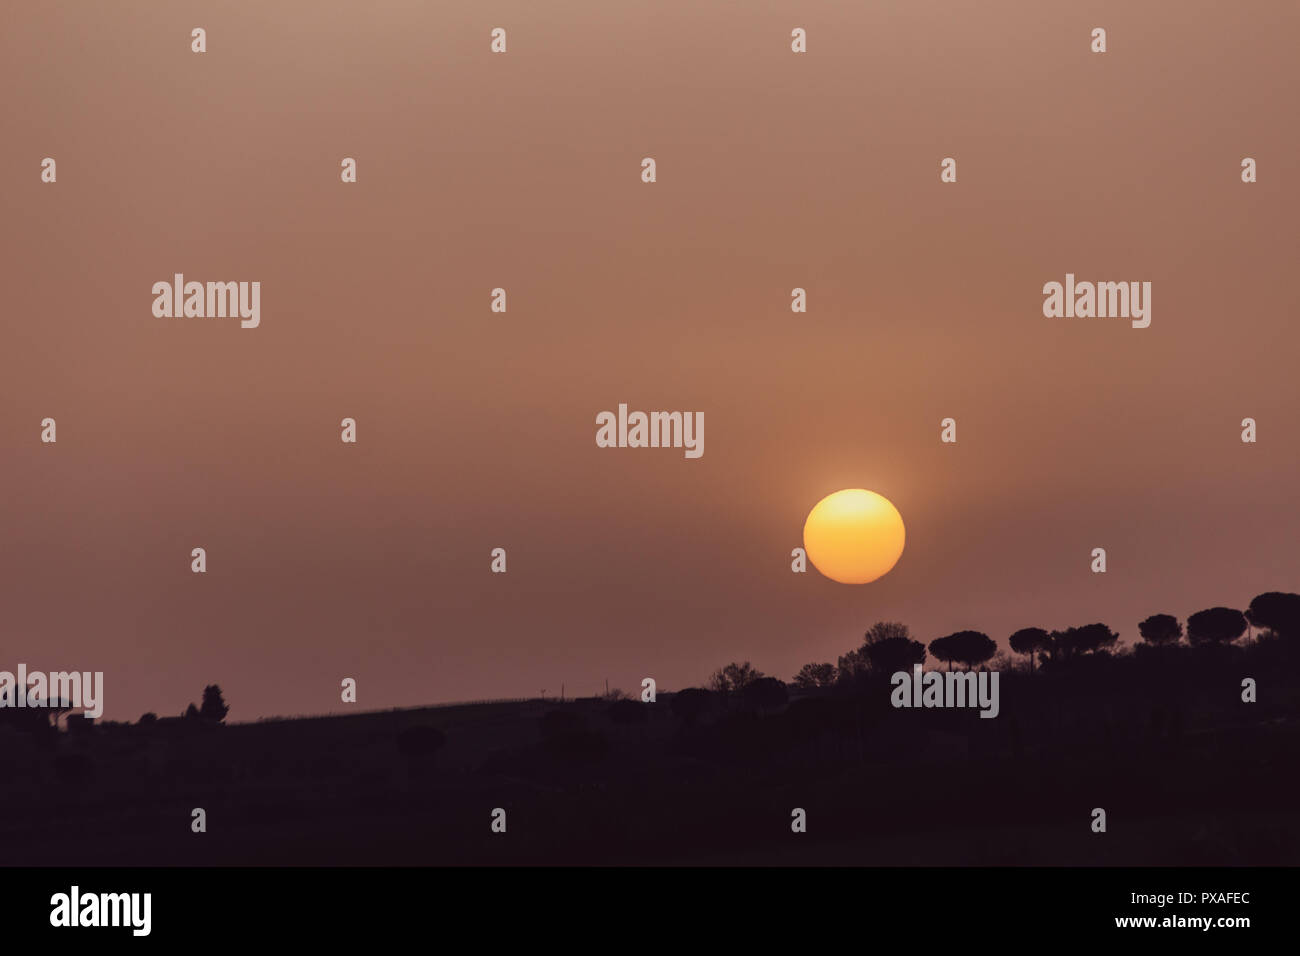 Sunset with sand suspended in the atmosphere, coluring the sky red, over some trees silhouettes Stock Photo